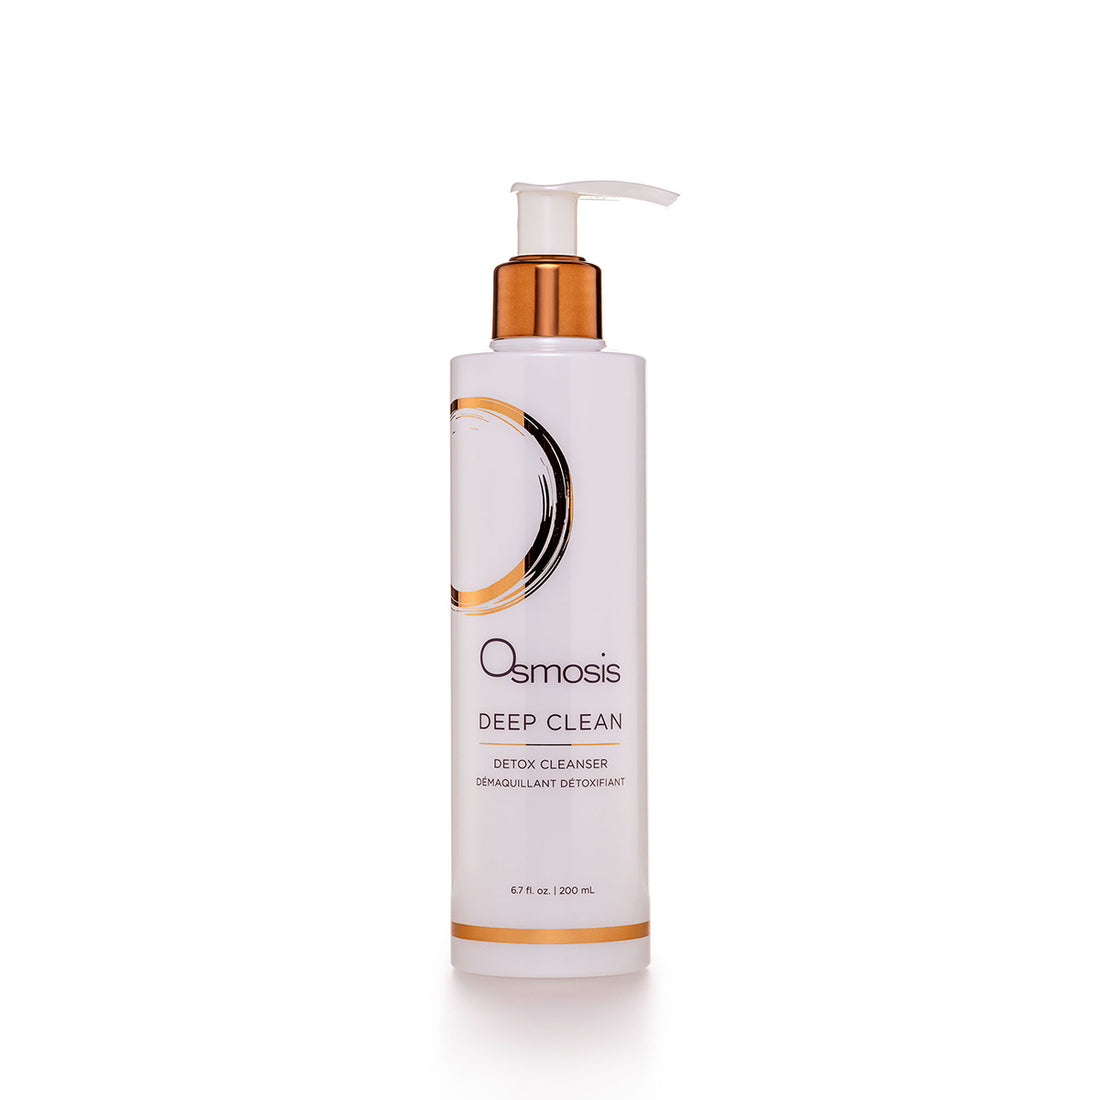 Osmosis Skincare Deep Clean Cleanser is great for oily to combination skin types to remove impurities. 